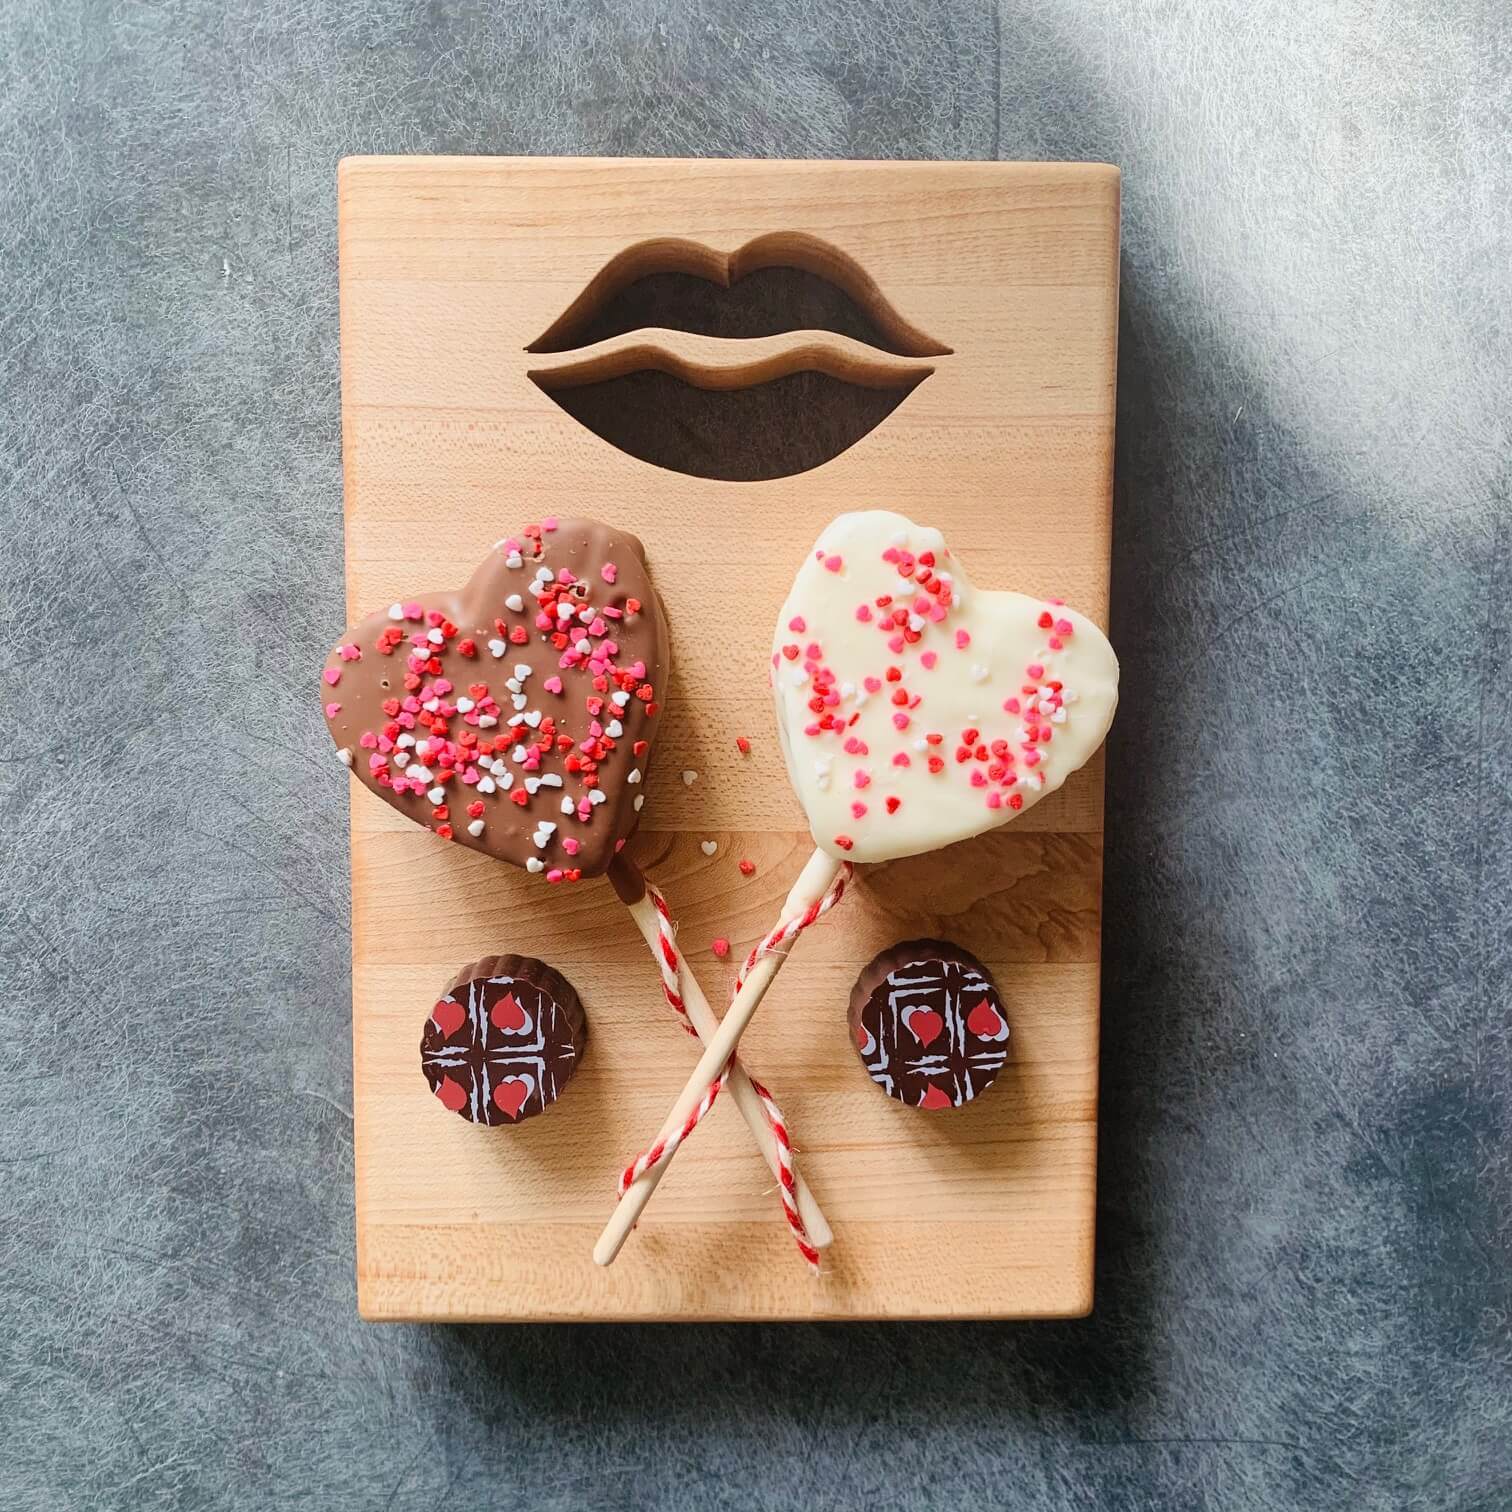 Wooden Cutting Board with Lips cut out at the top